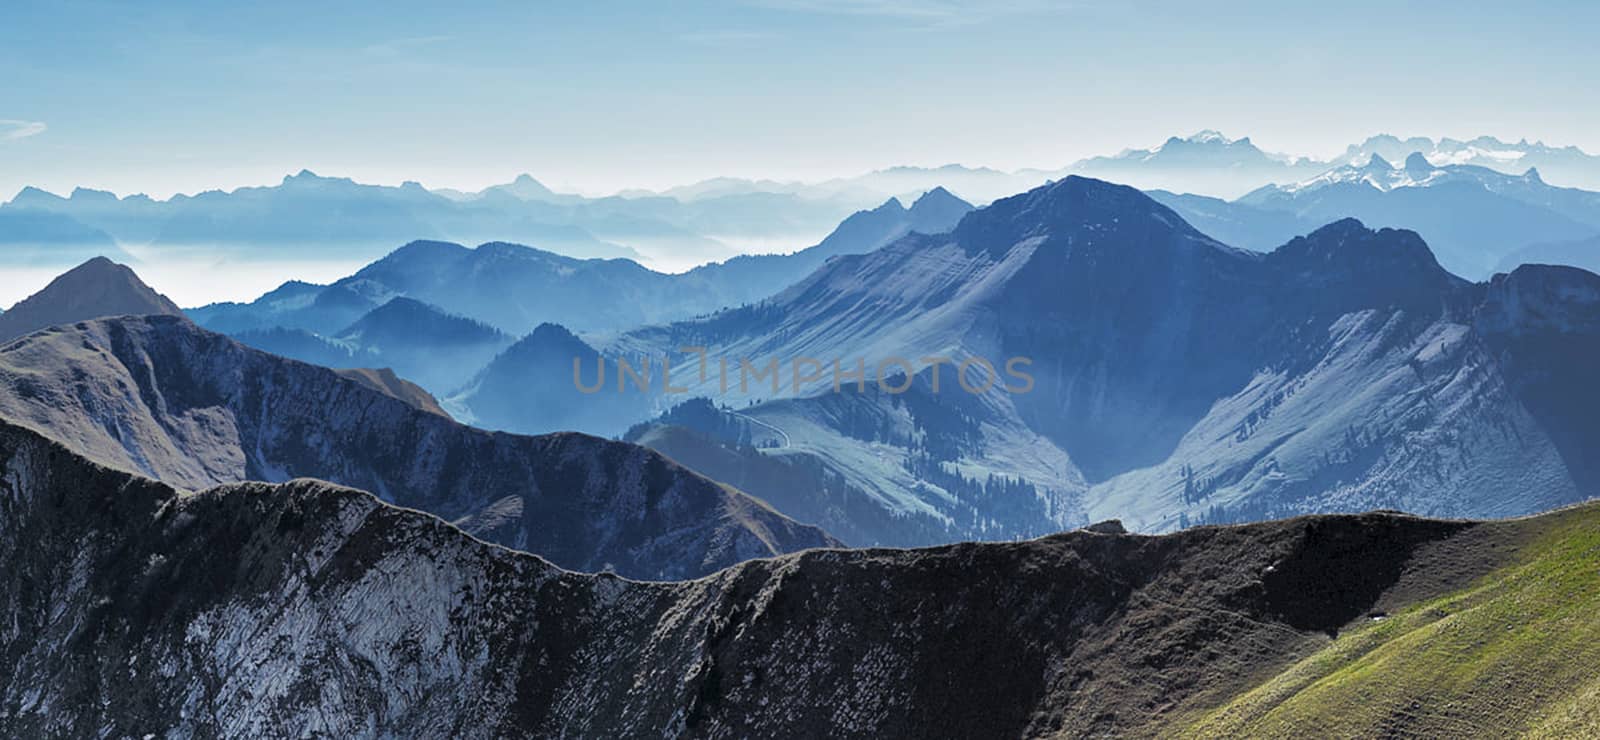 Beautiful pictures of  Switzerland by TravelSync27